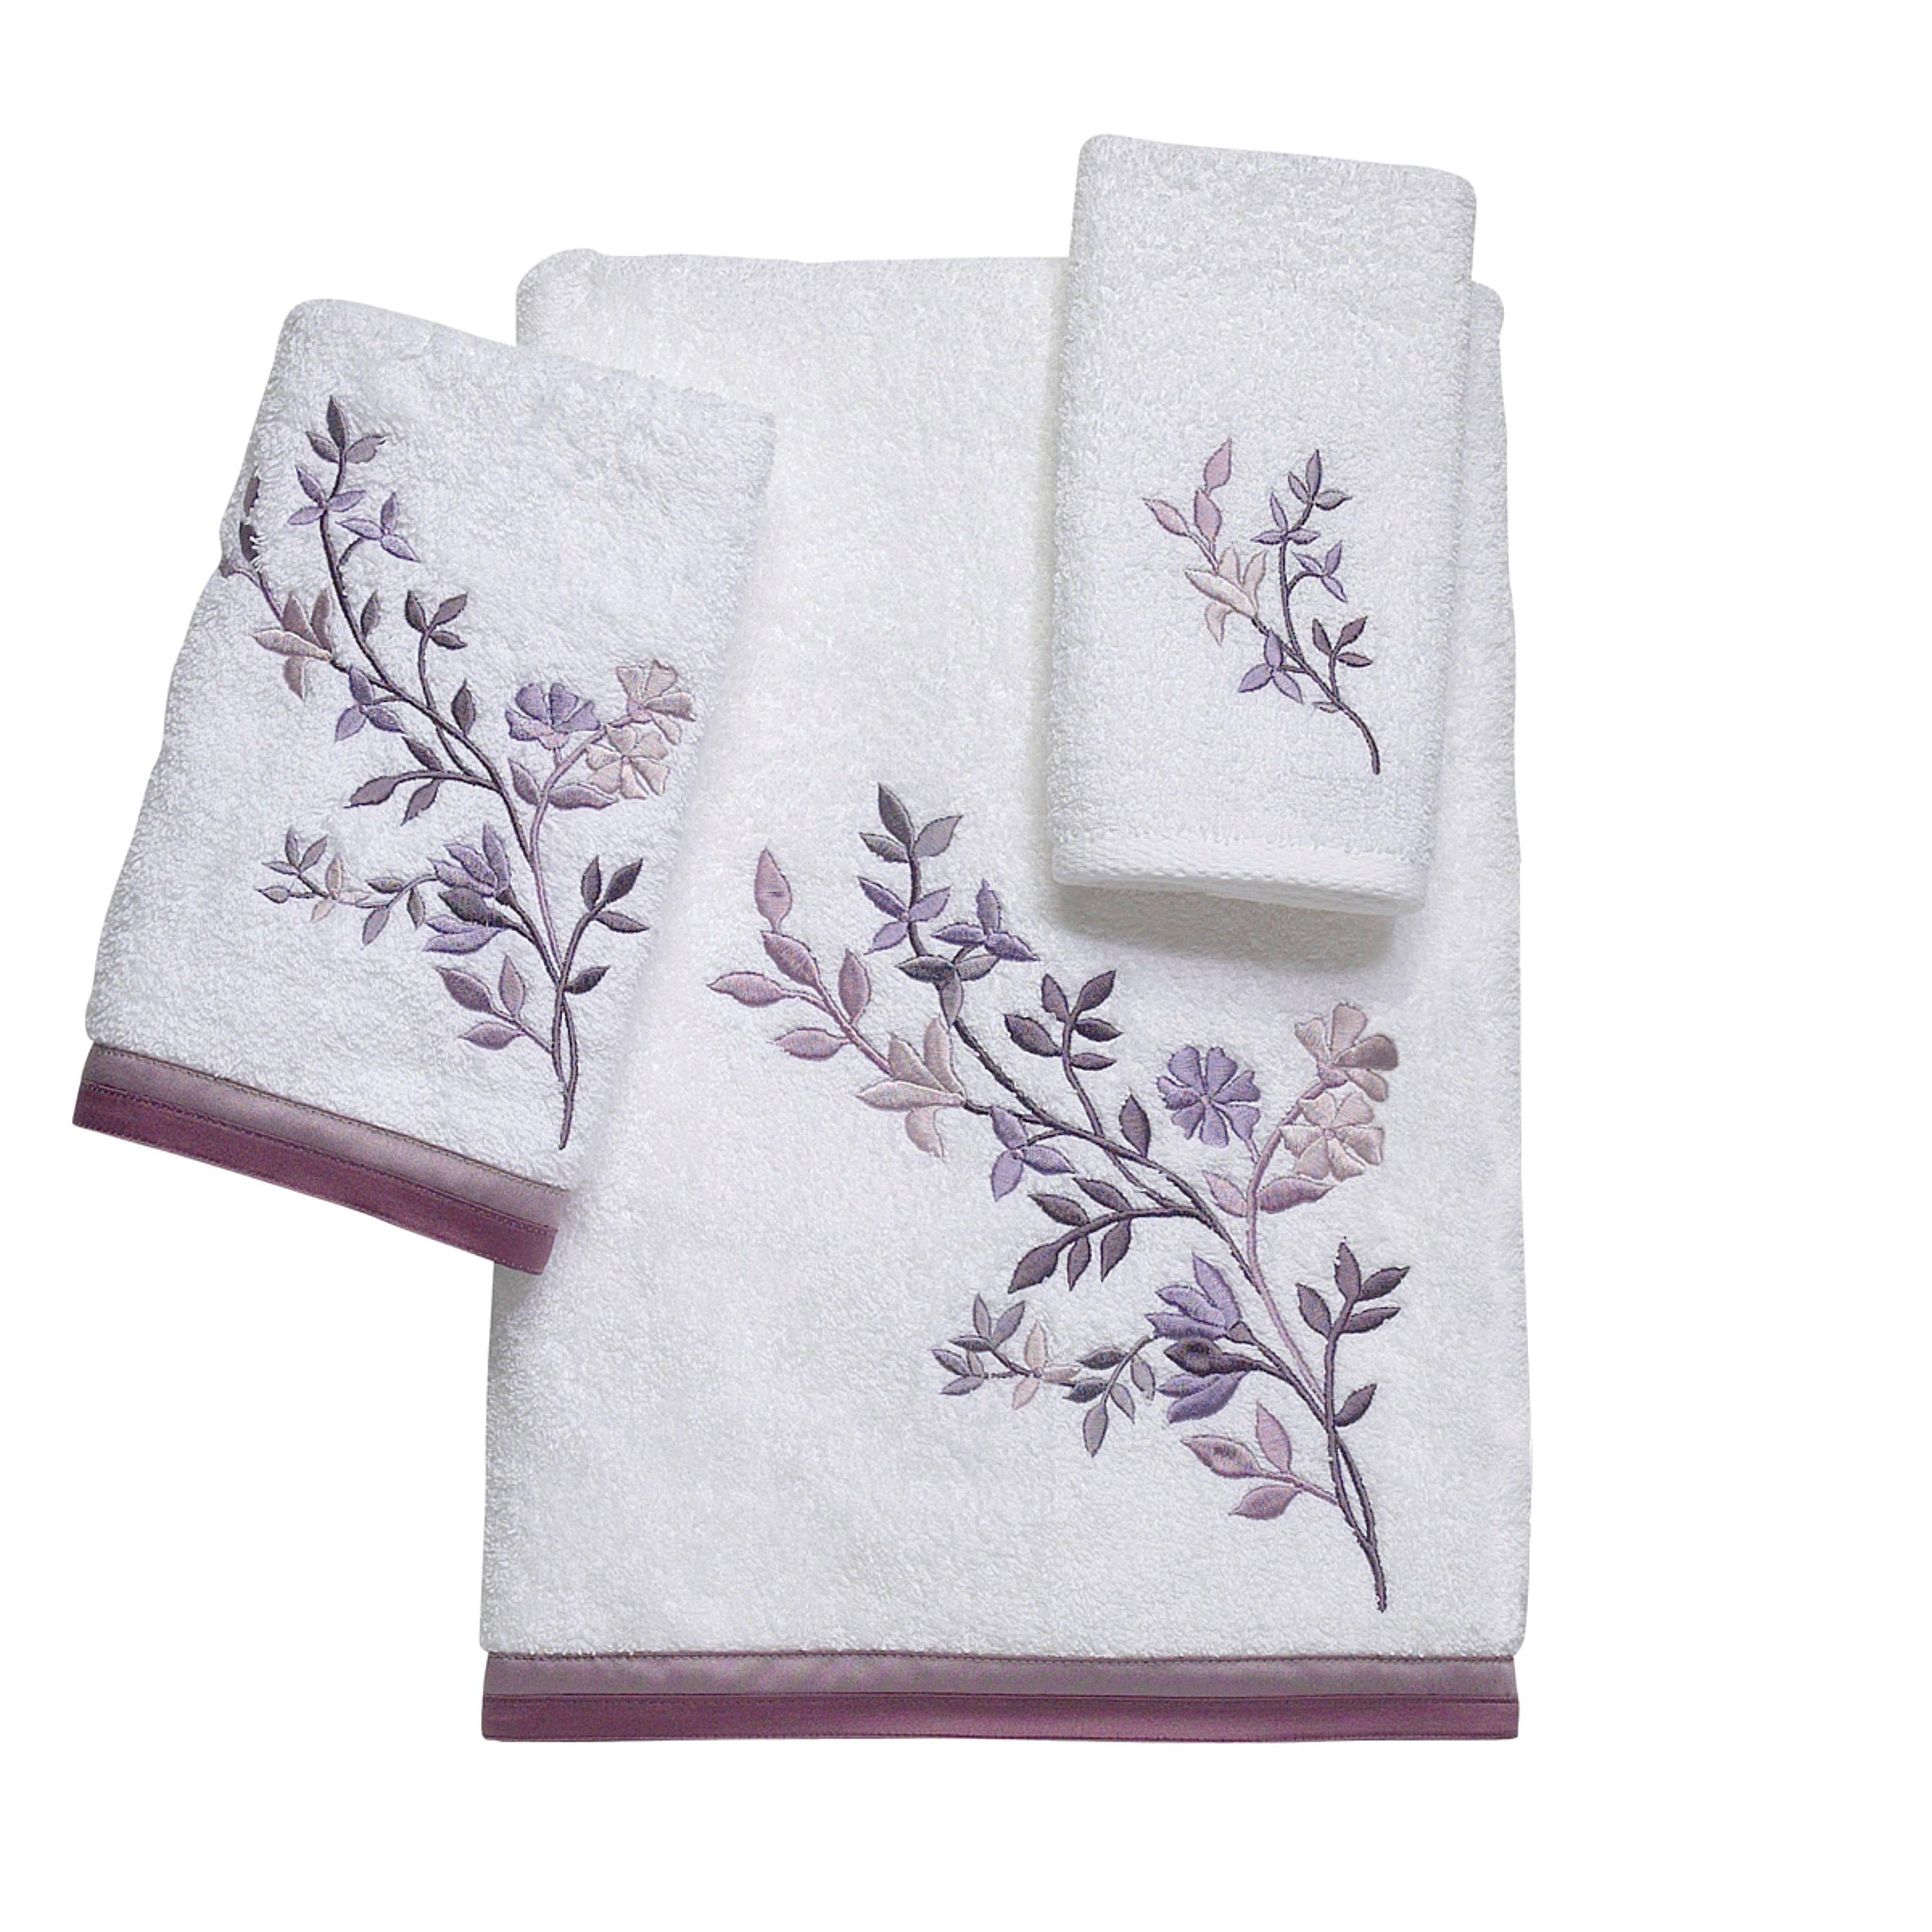 Premier Whisper Towel Collection